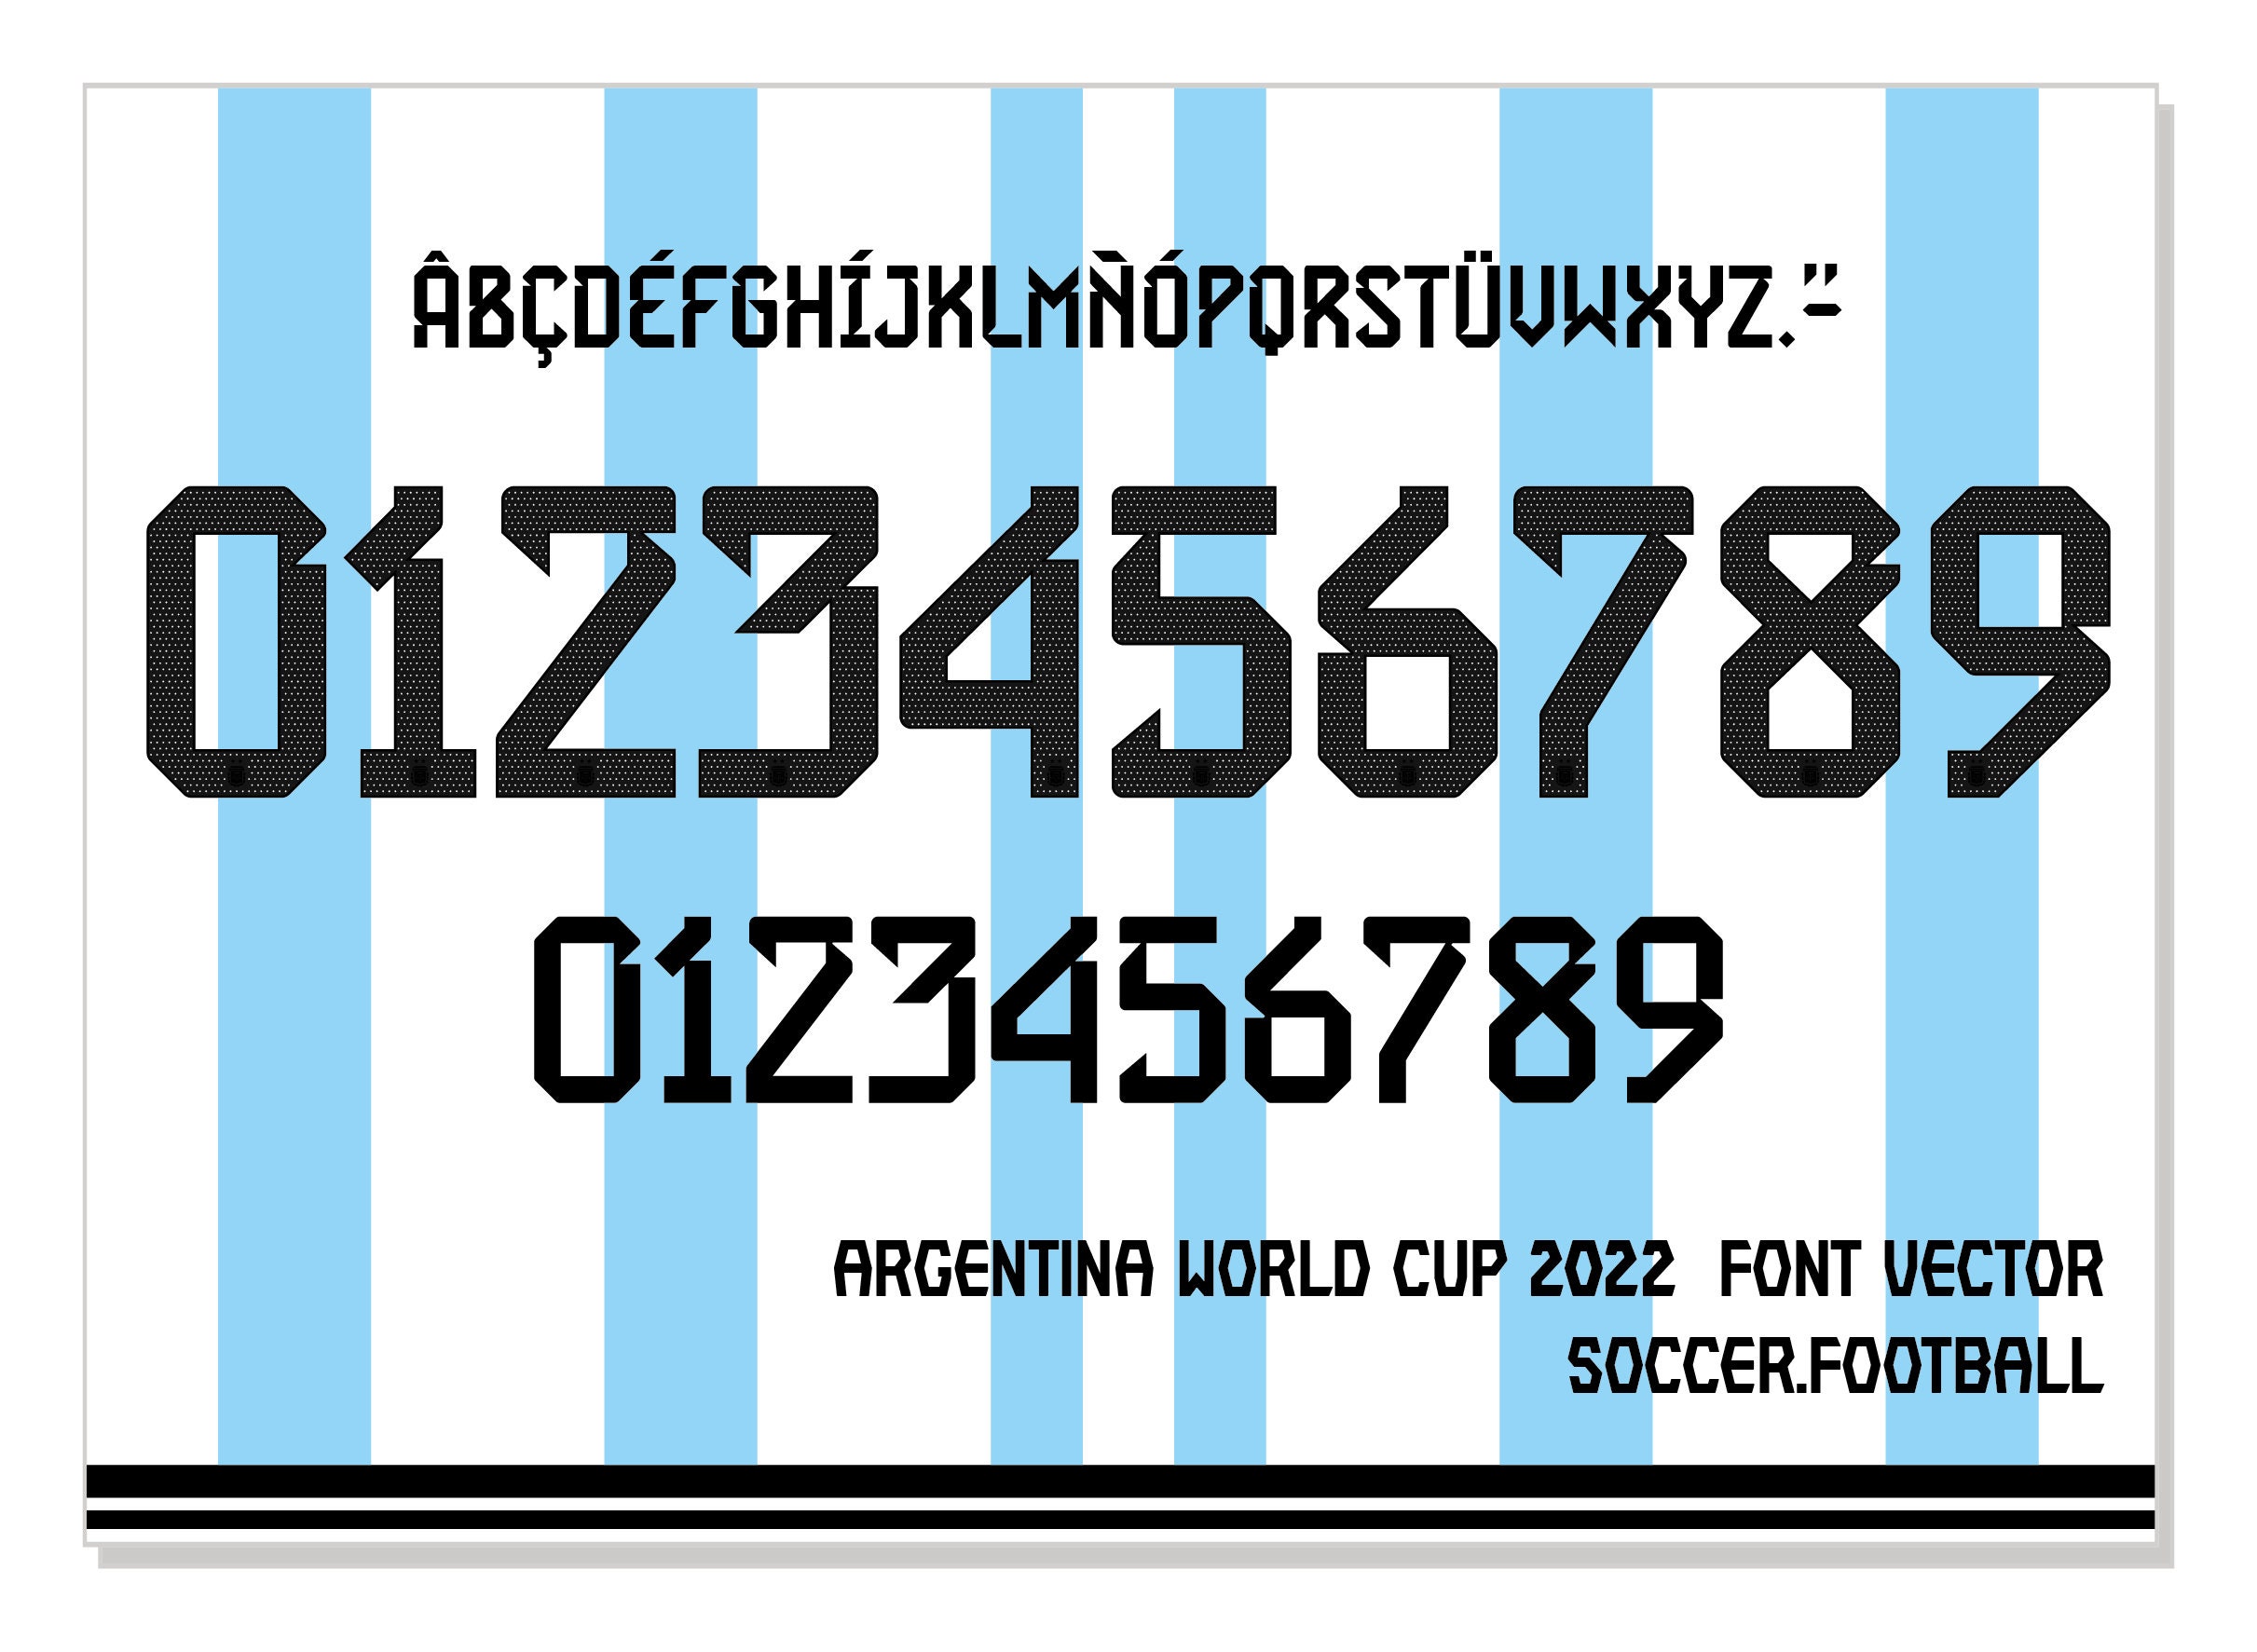 ARGENTINA WINS THE 2022 WORLD CUP 19”x13” COMMEMORATIVE POSTER